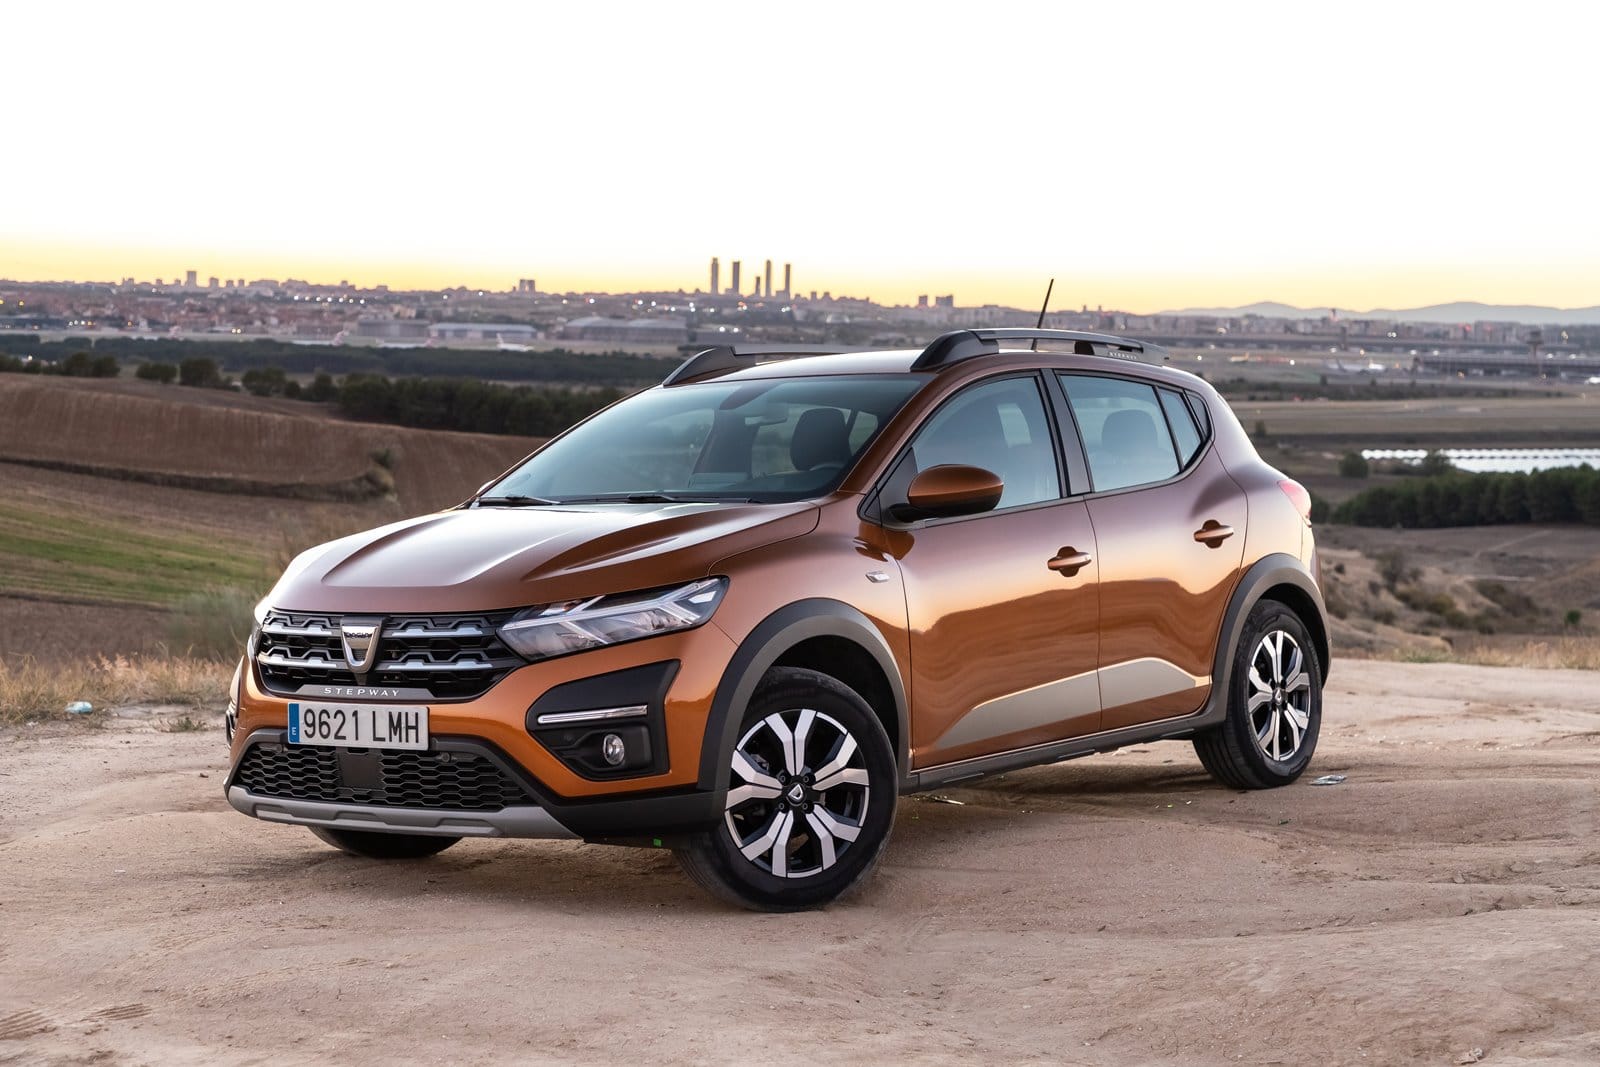 Sales in Spain are stagnant in January 2022; Leading Toyota